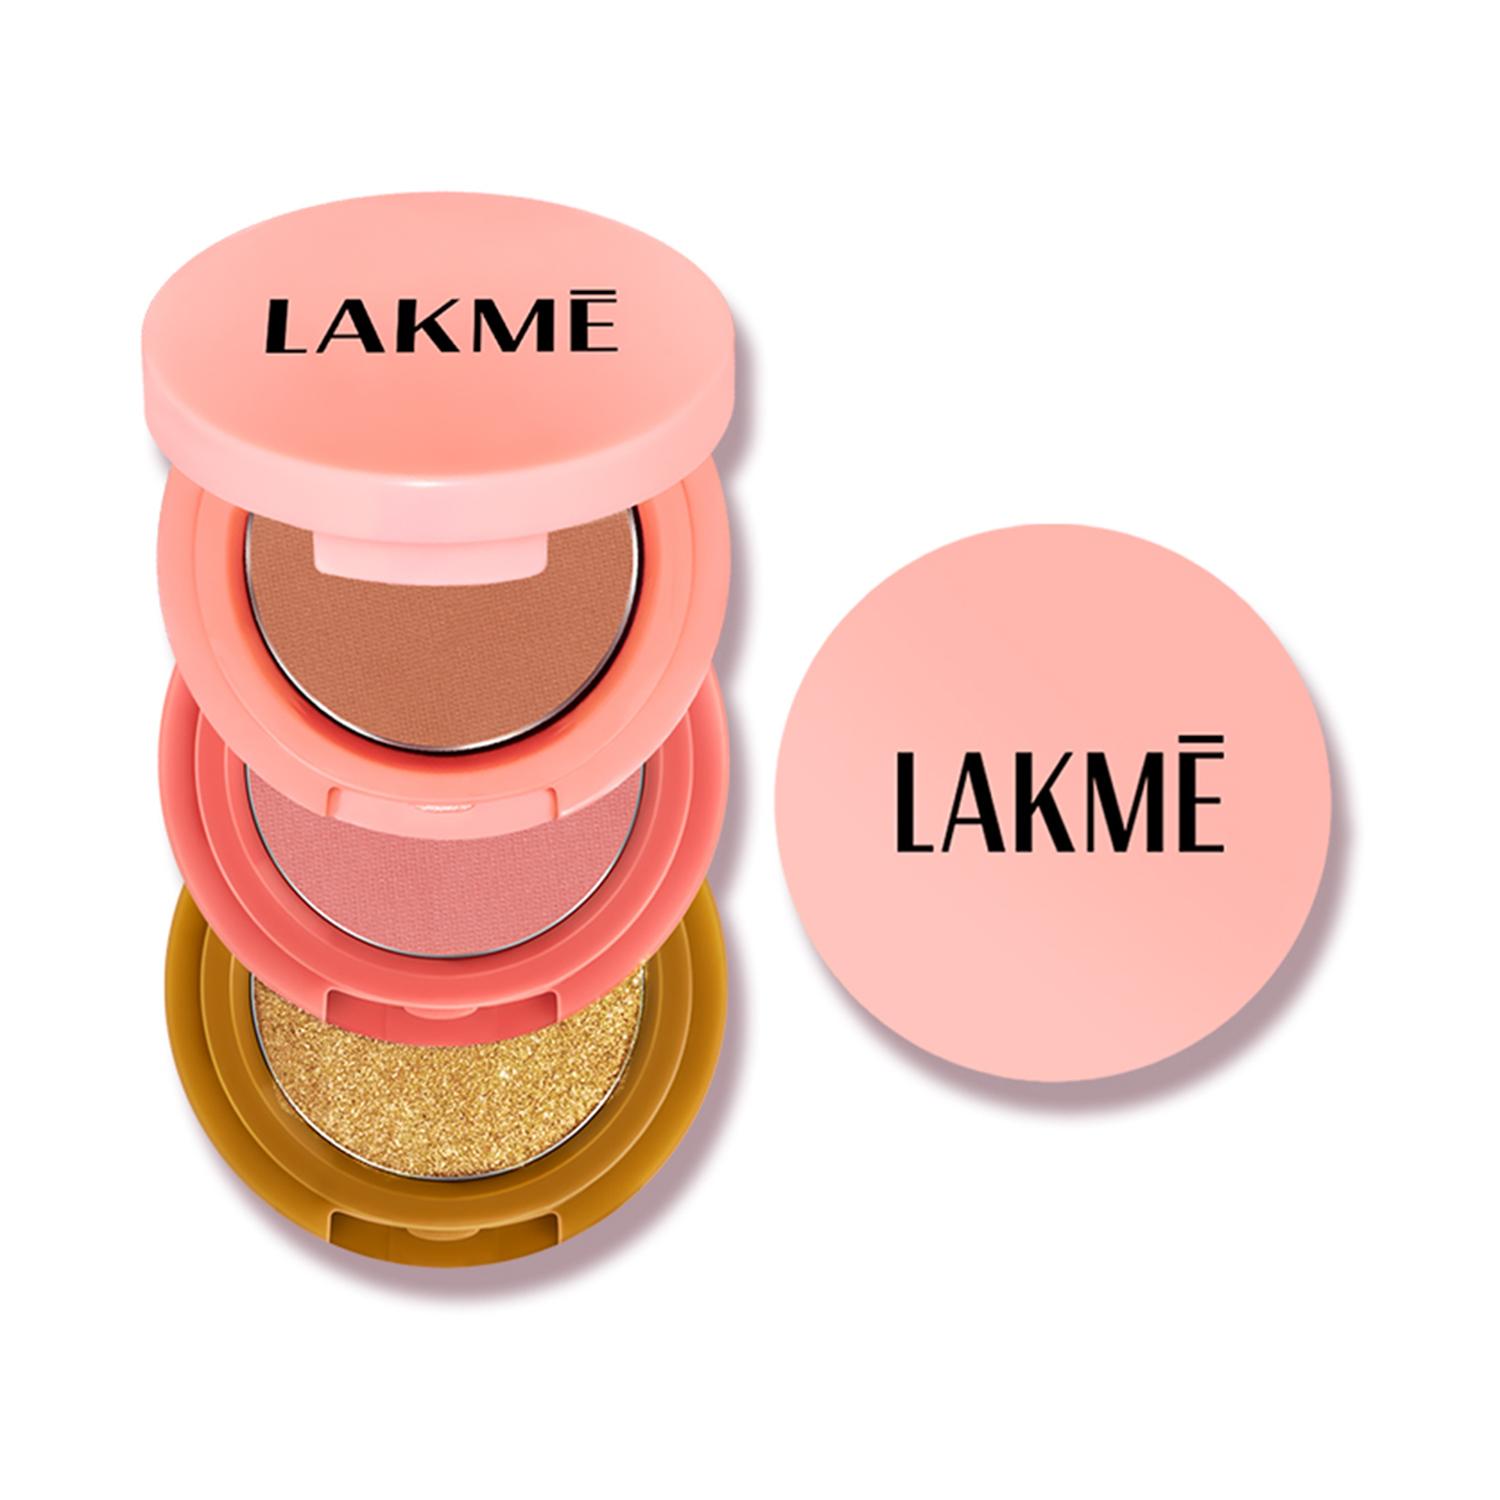 Lakme | Lakme 9to5 Eyeconic Shadow Stack - Nude Bomb (7 g)